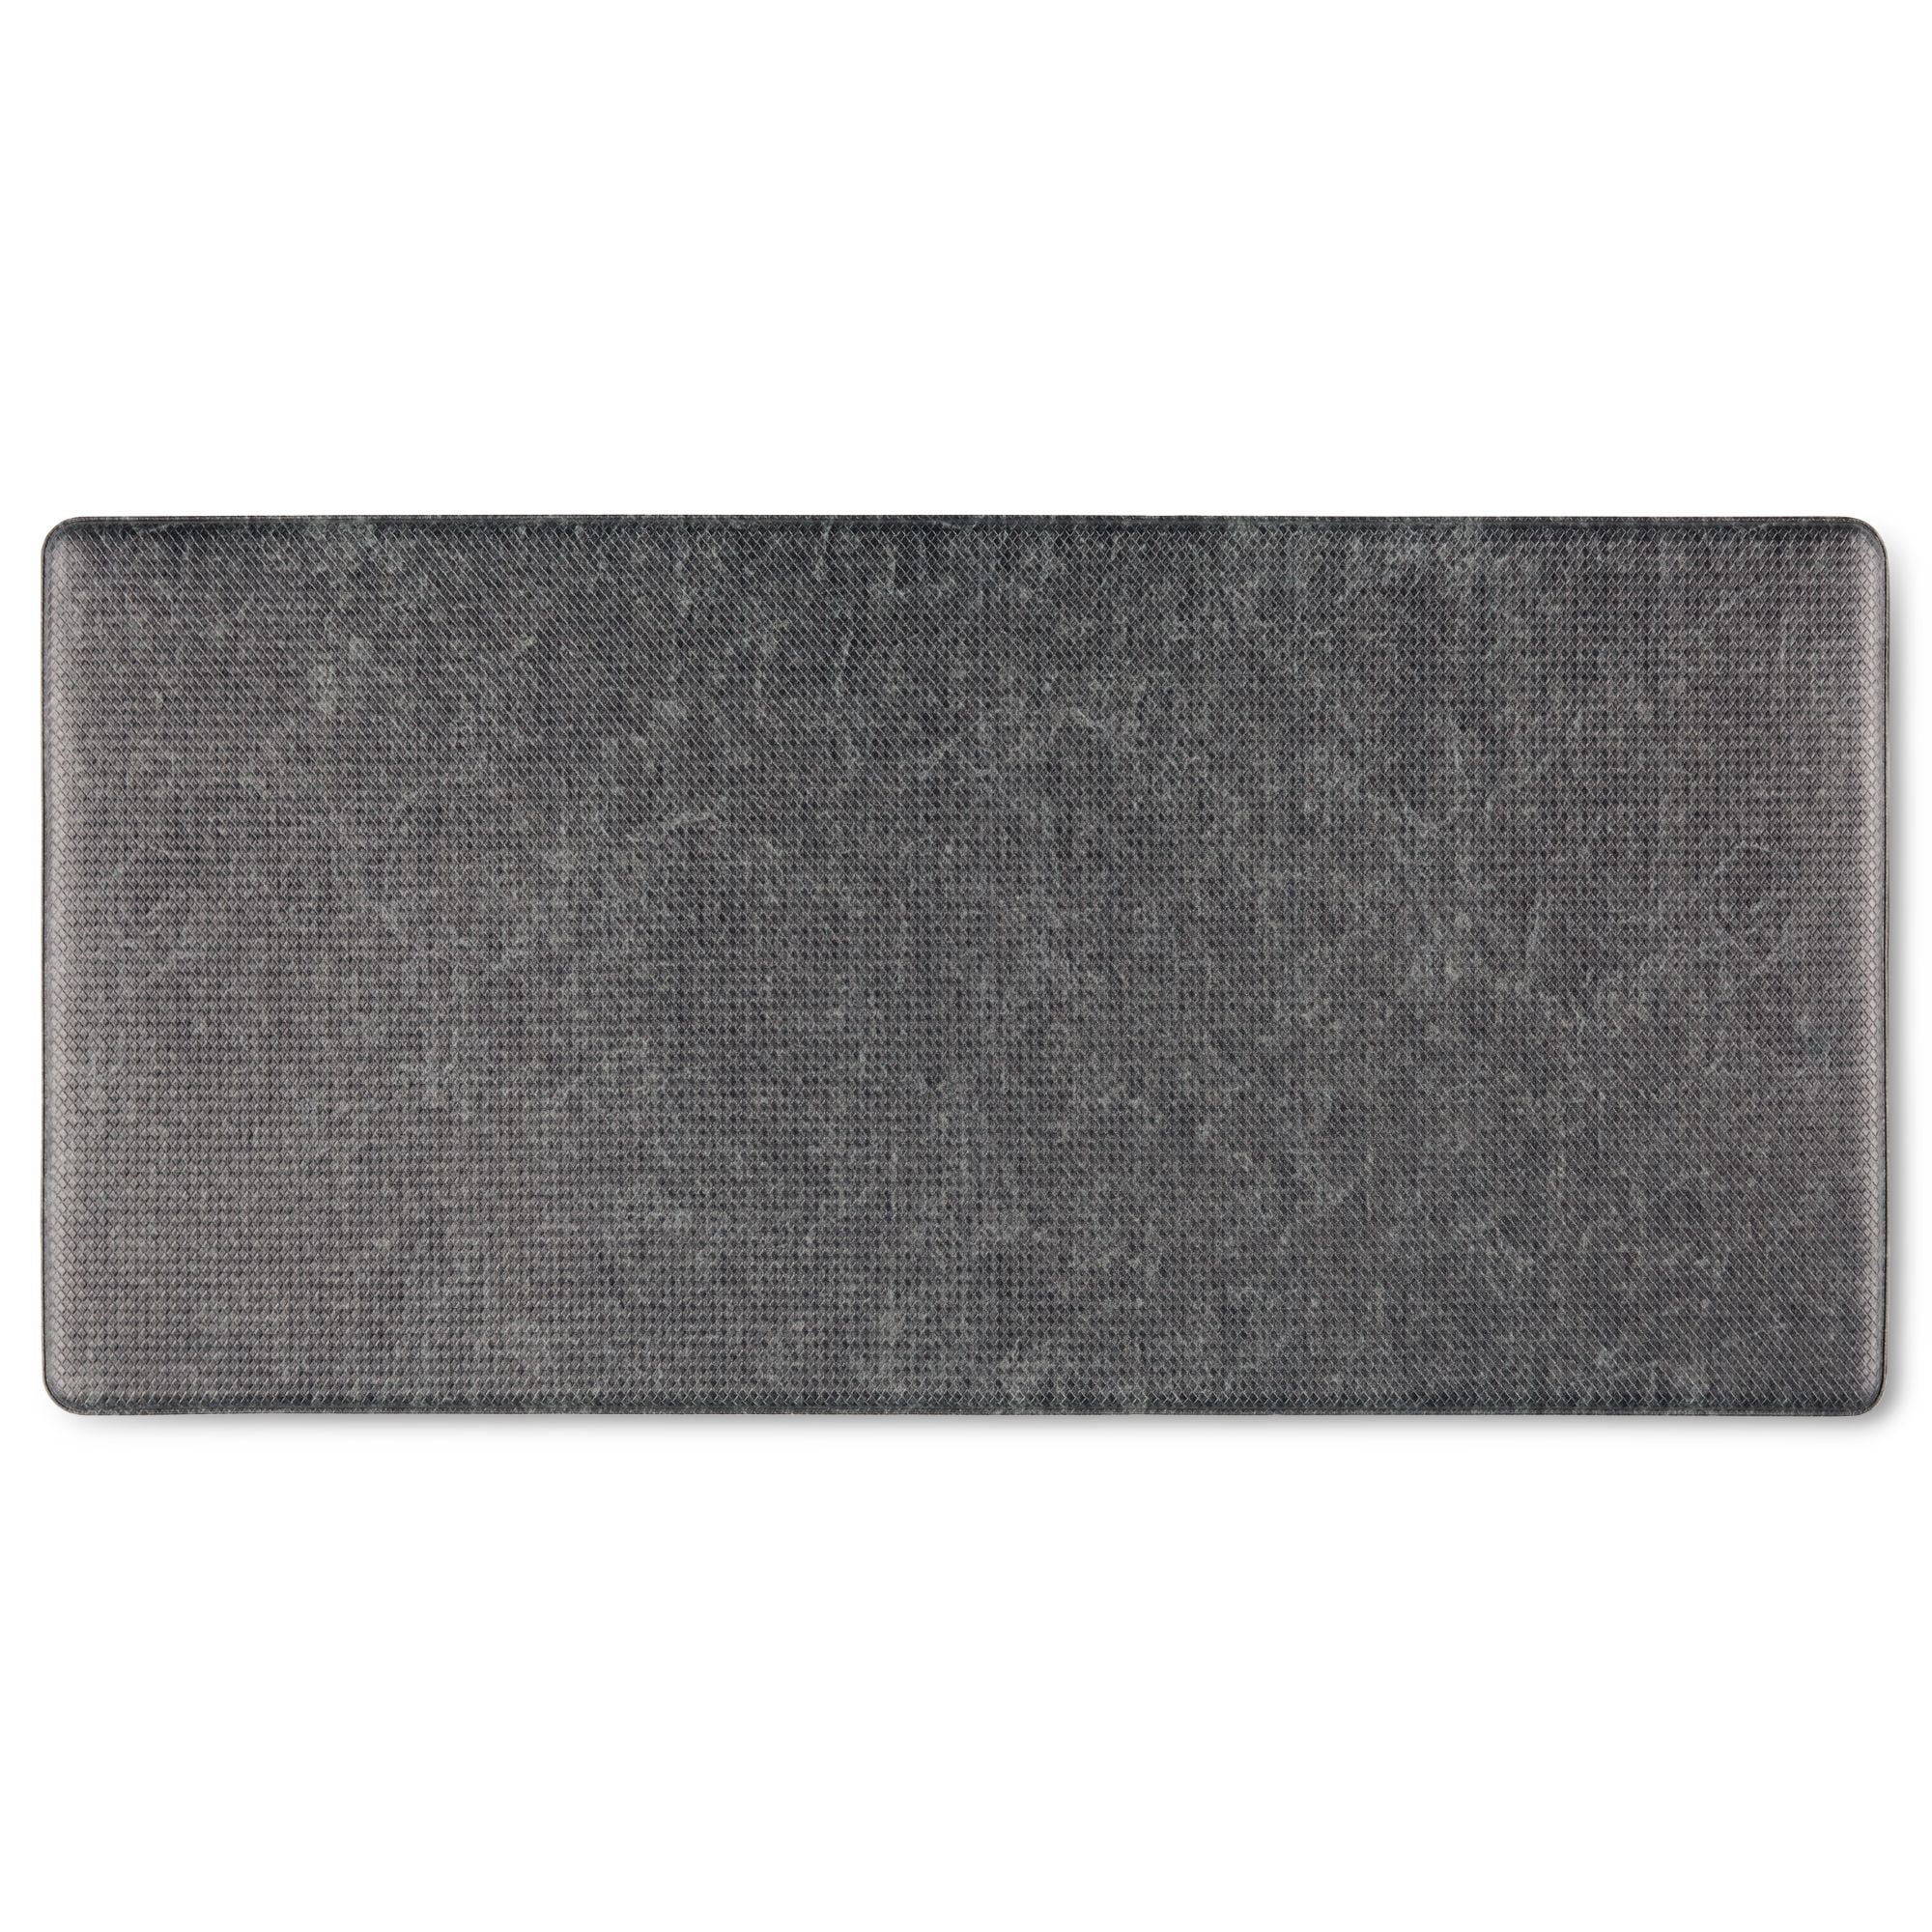 Better Homes & Gardens Washed Paper Comfort Air Mat, 20"x41", Black